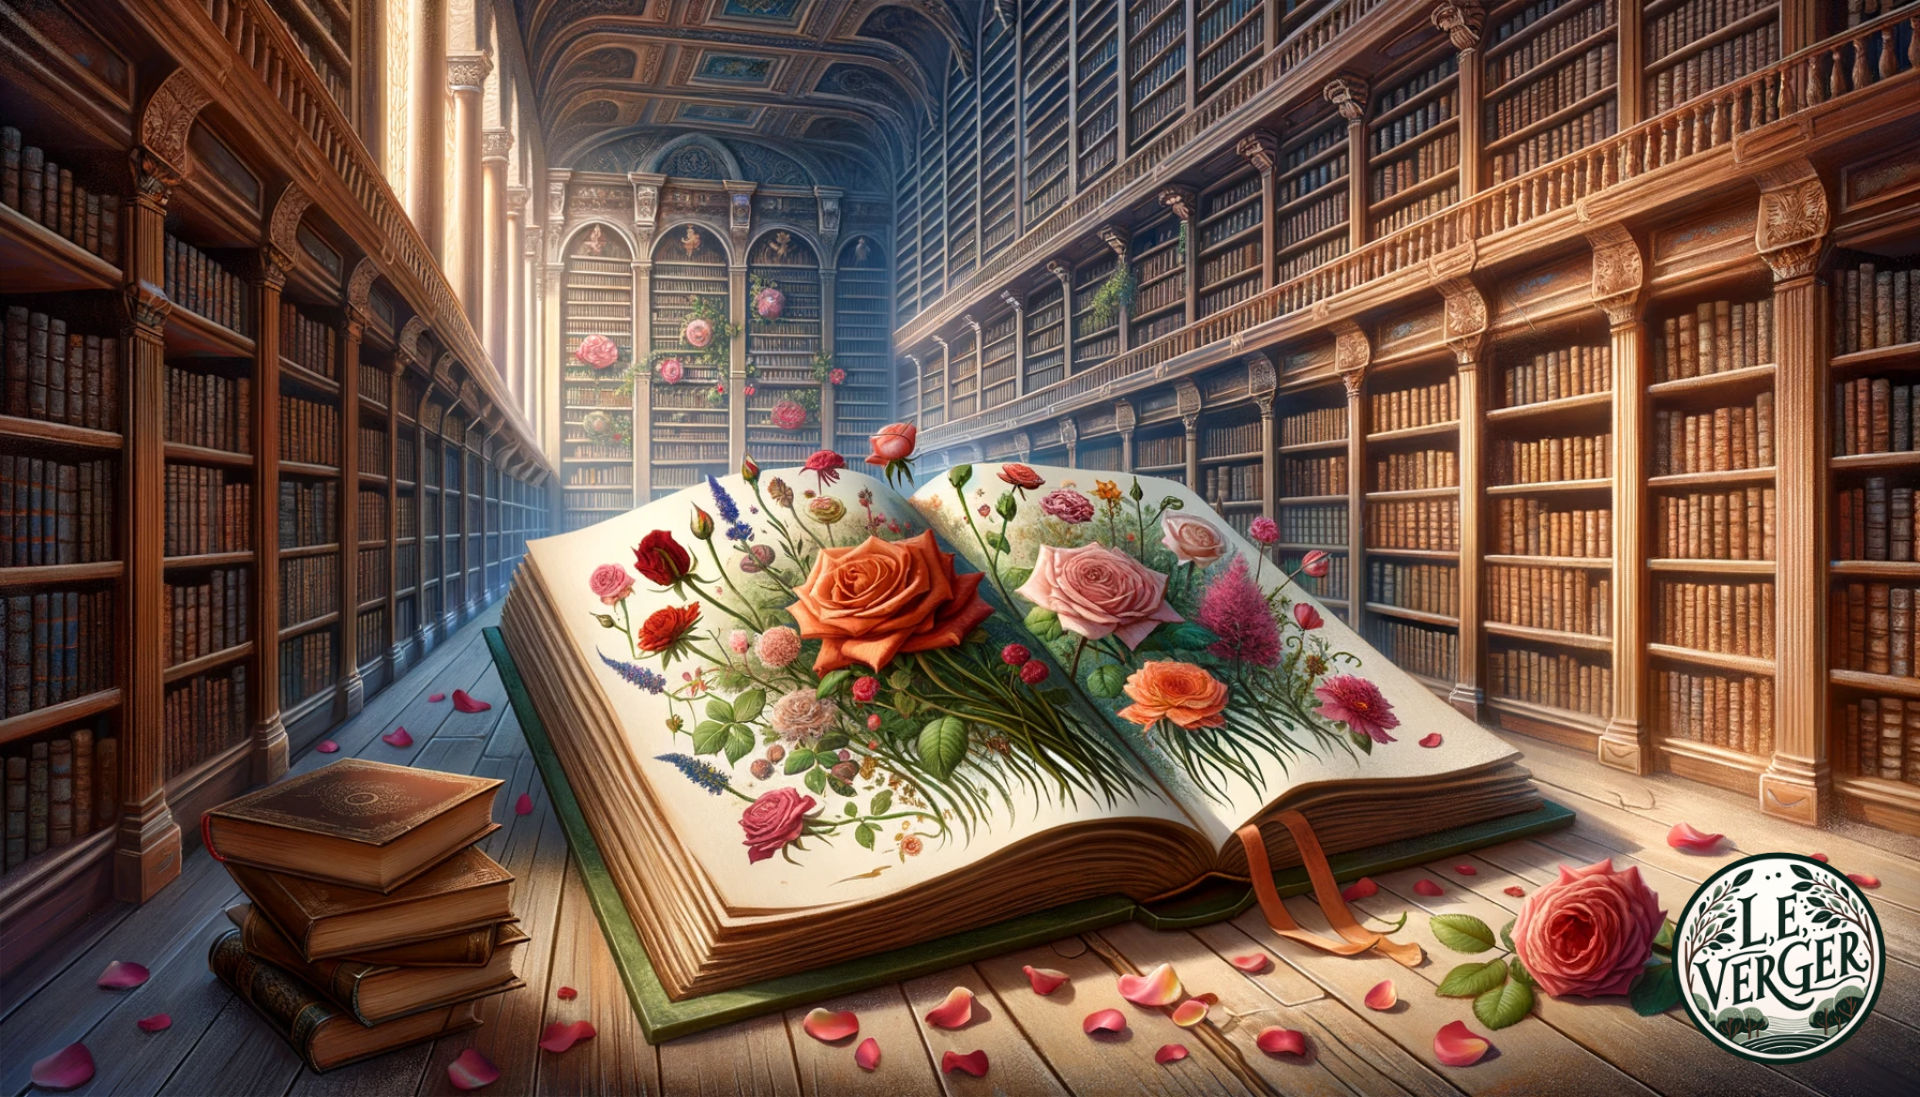 Illustration of an old library setting with towering bookshelves. A large, ancient book titled 'Rose Reverie' lies open, and from its pages, vibrant illustrations of different rose varieties emerge, creating a 3D experience. The environment is filled with the aroma of roses, and petals gently drift in the air.